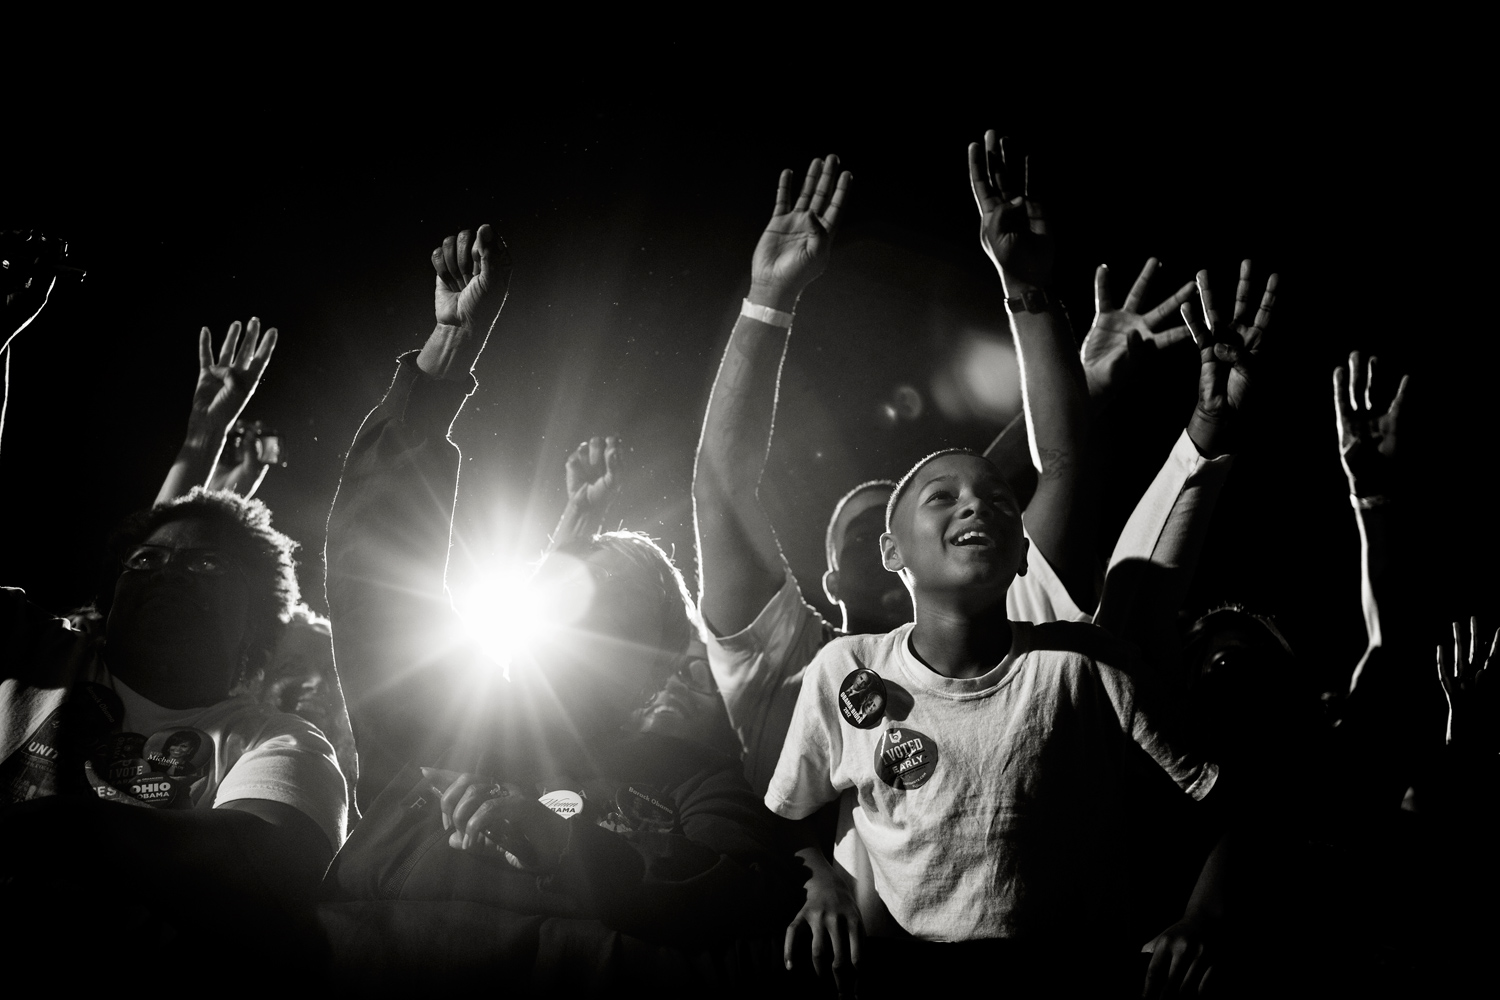 Image: Oct. 25, 2012. Supporters cheer on President Obama at a campaign rally in Cleveland.